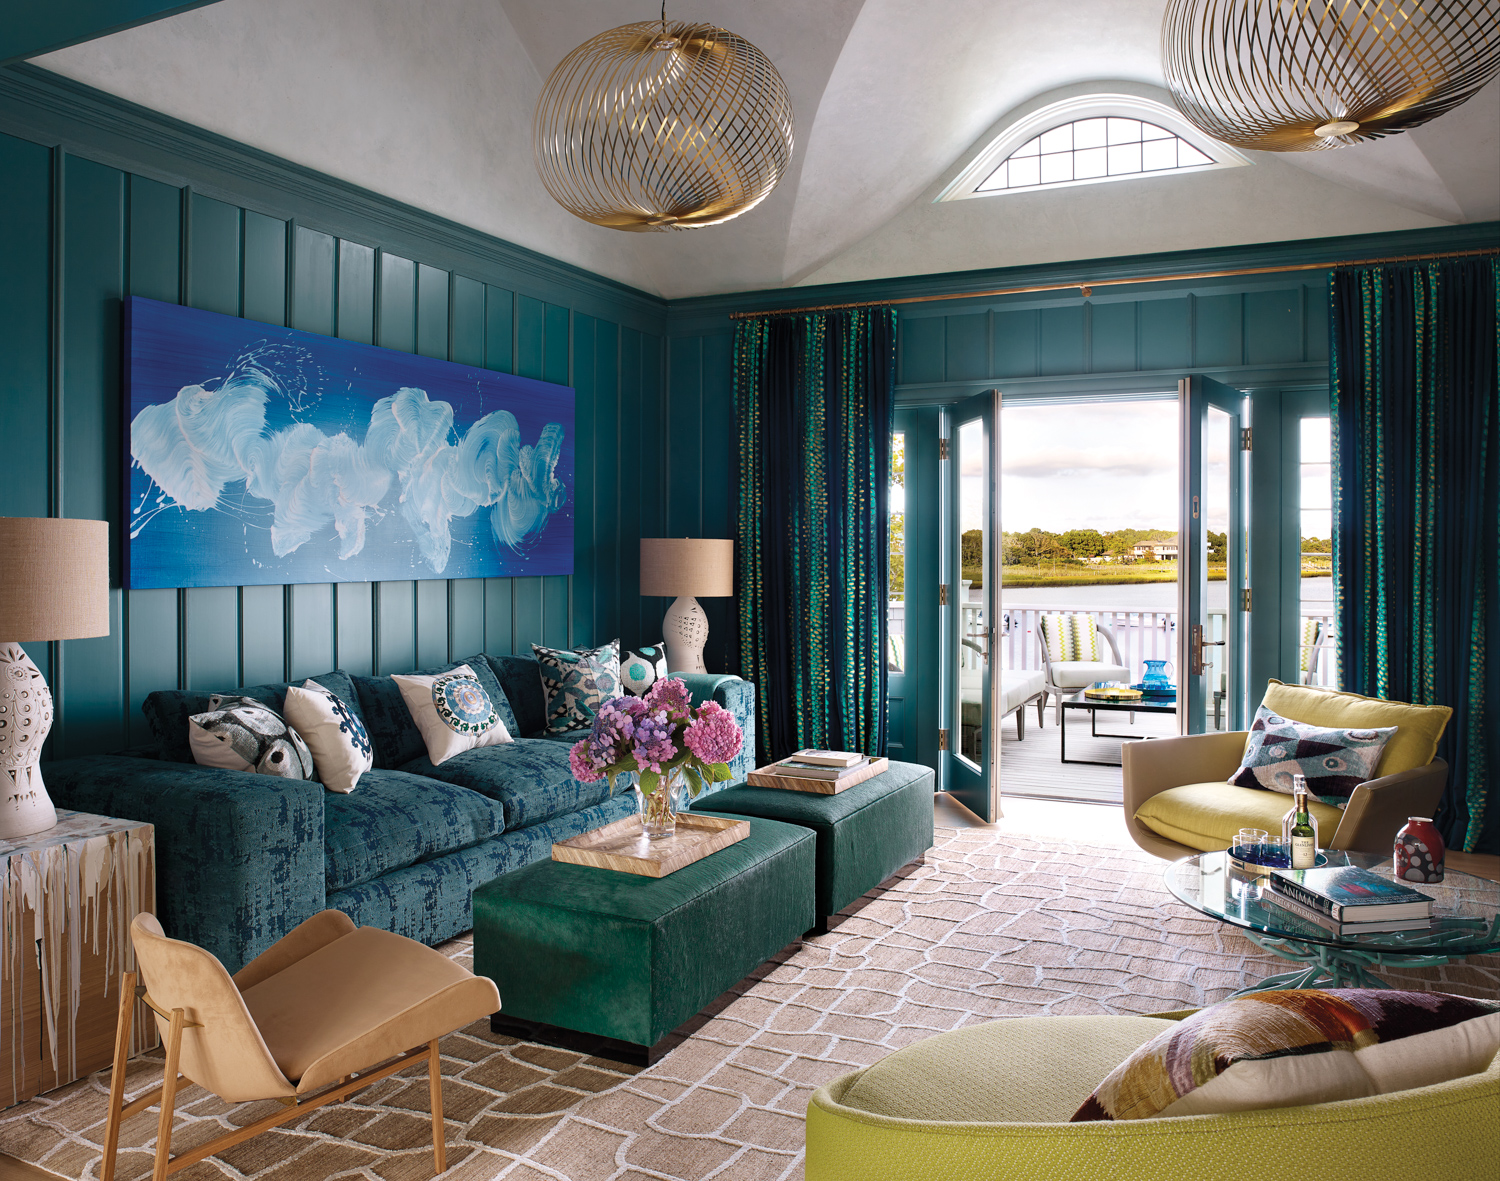 Escape To This Color-Splashed Hamptons Abode For The Weekend